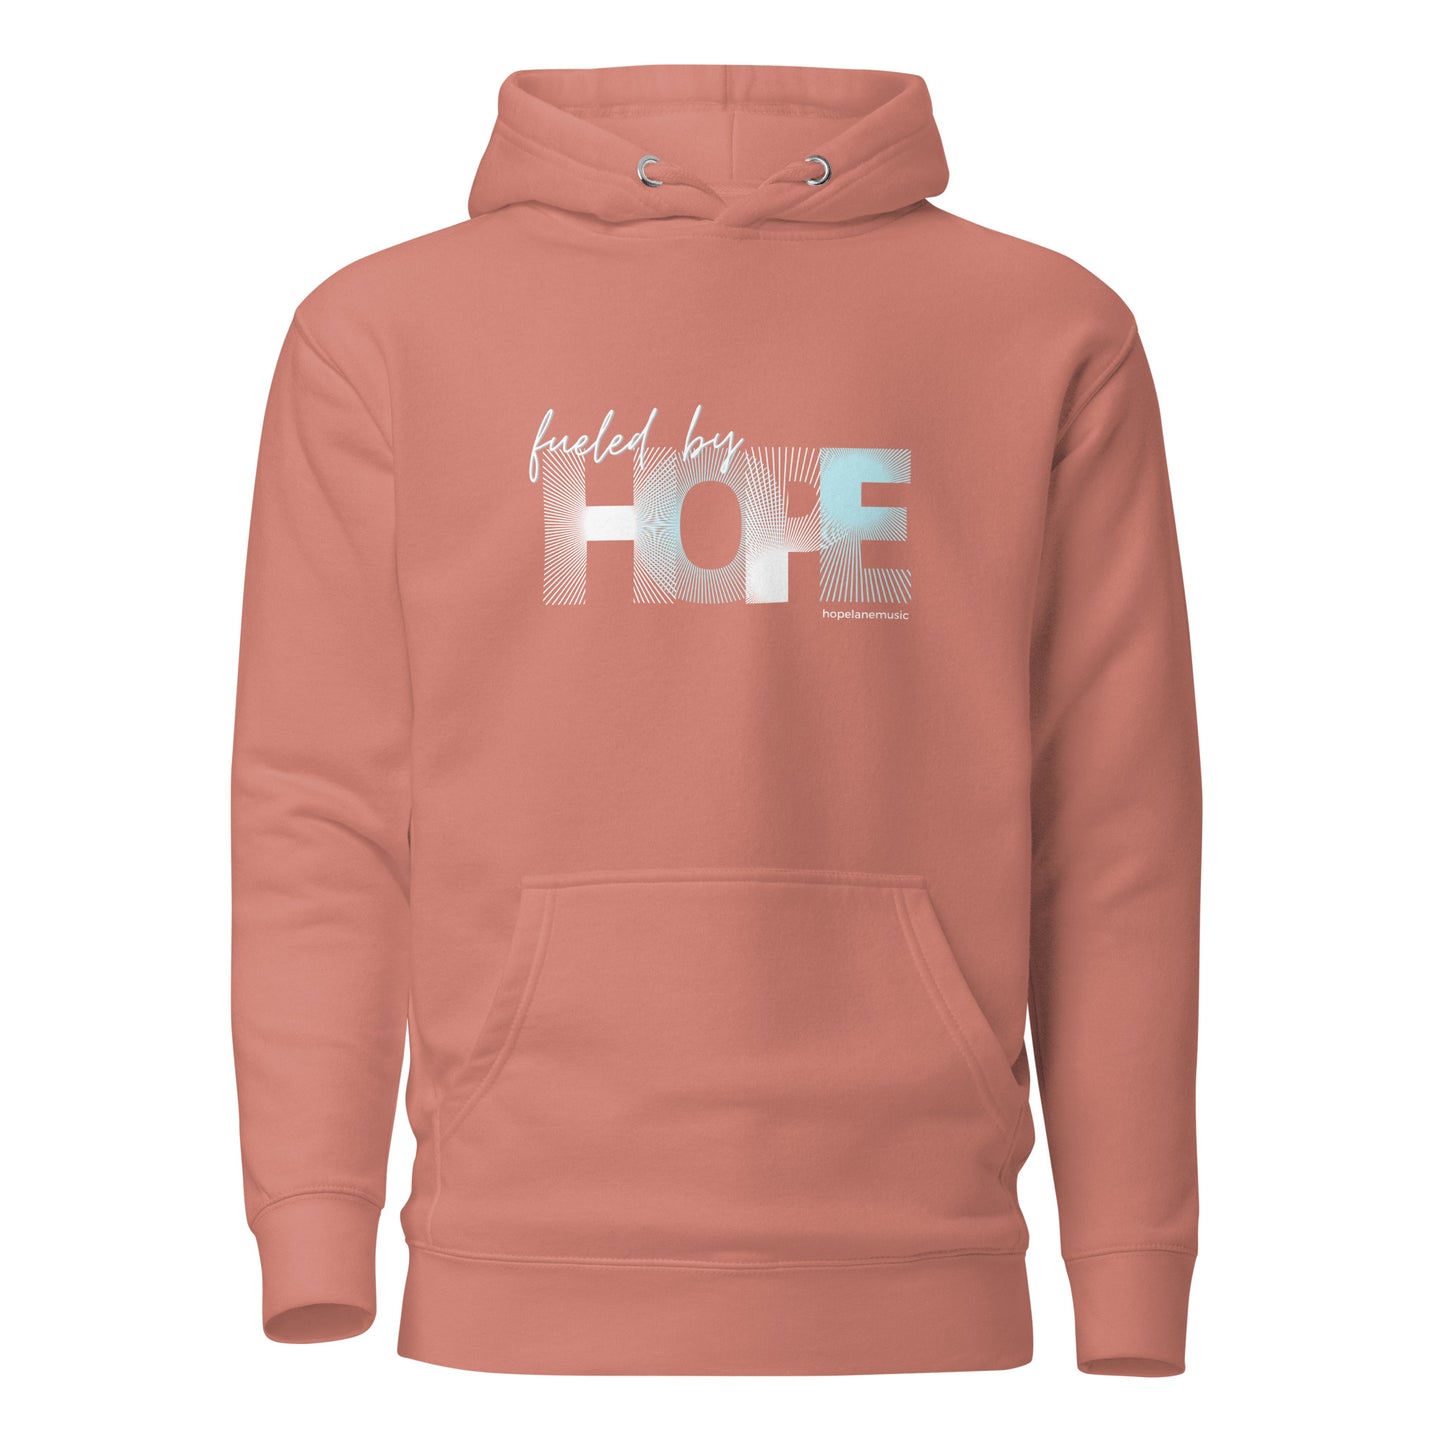 'Fueled by Hope' Unisex Hoodie (official Hope Lane Merch)